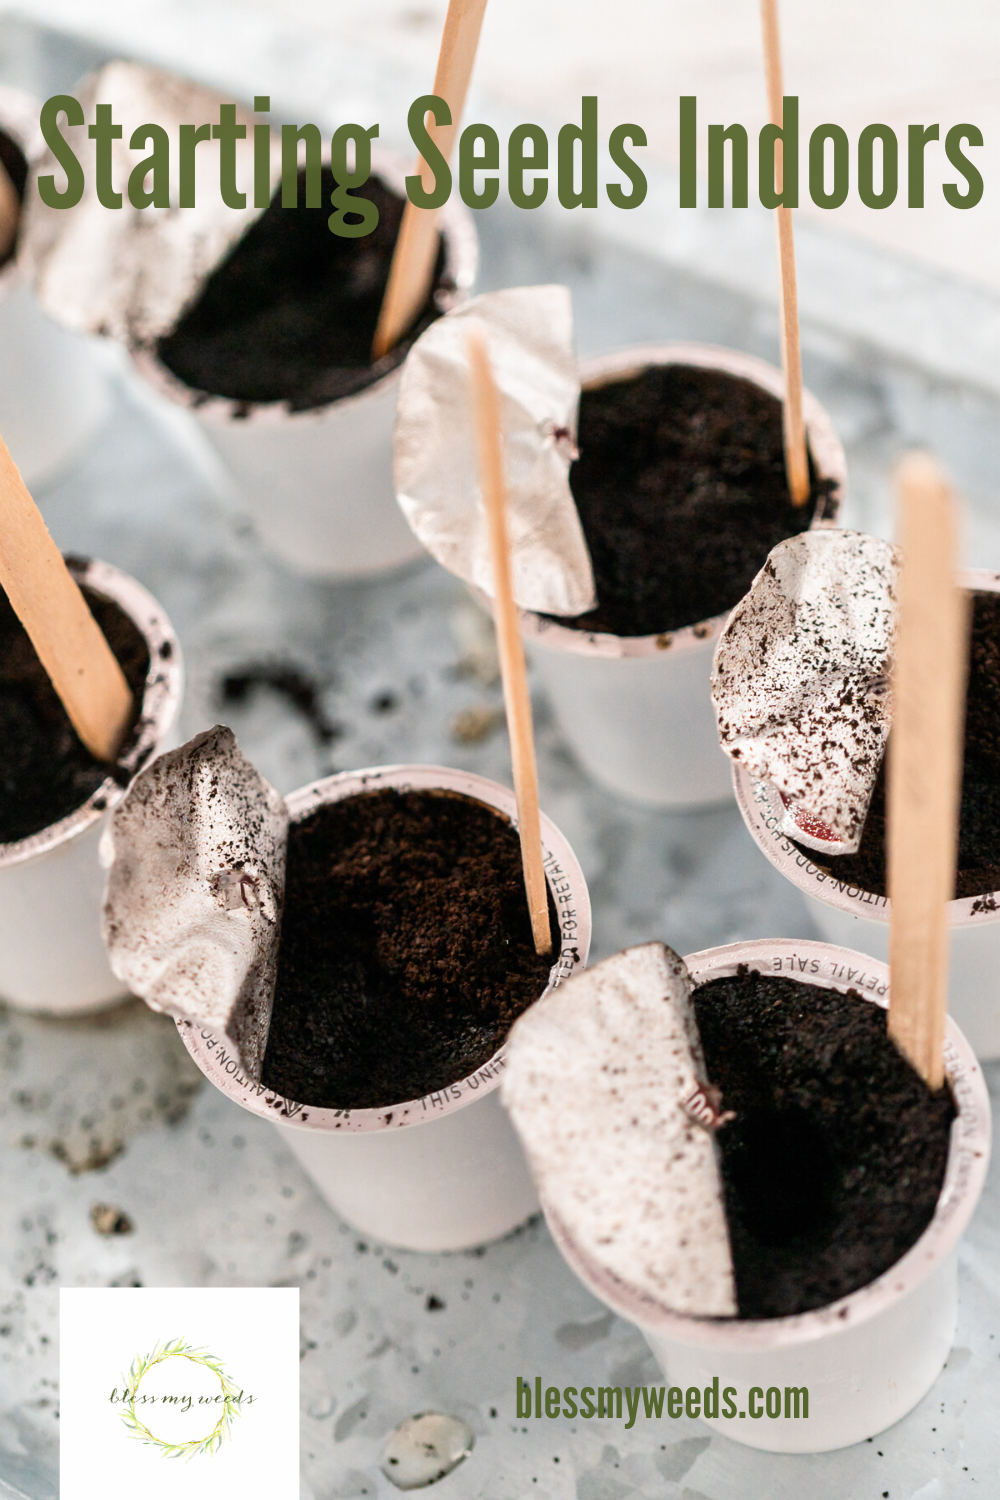 Get a jump on the season by starting your seeds indoors. No worries about frost and its so easy to tend them. These 7 hacks for starting seeds indoors will give you all the reasons you need to give it a try. It's so easy. Read this post to learn more. #startingseeds #indoorgardening #blessmyweedsblog